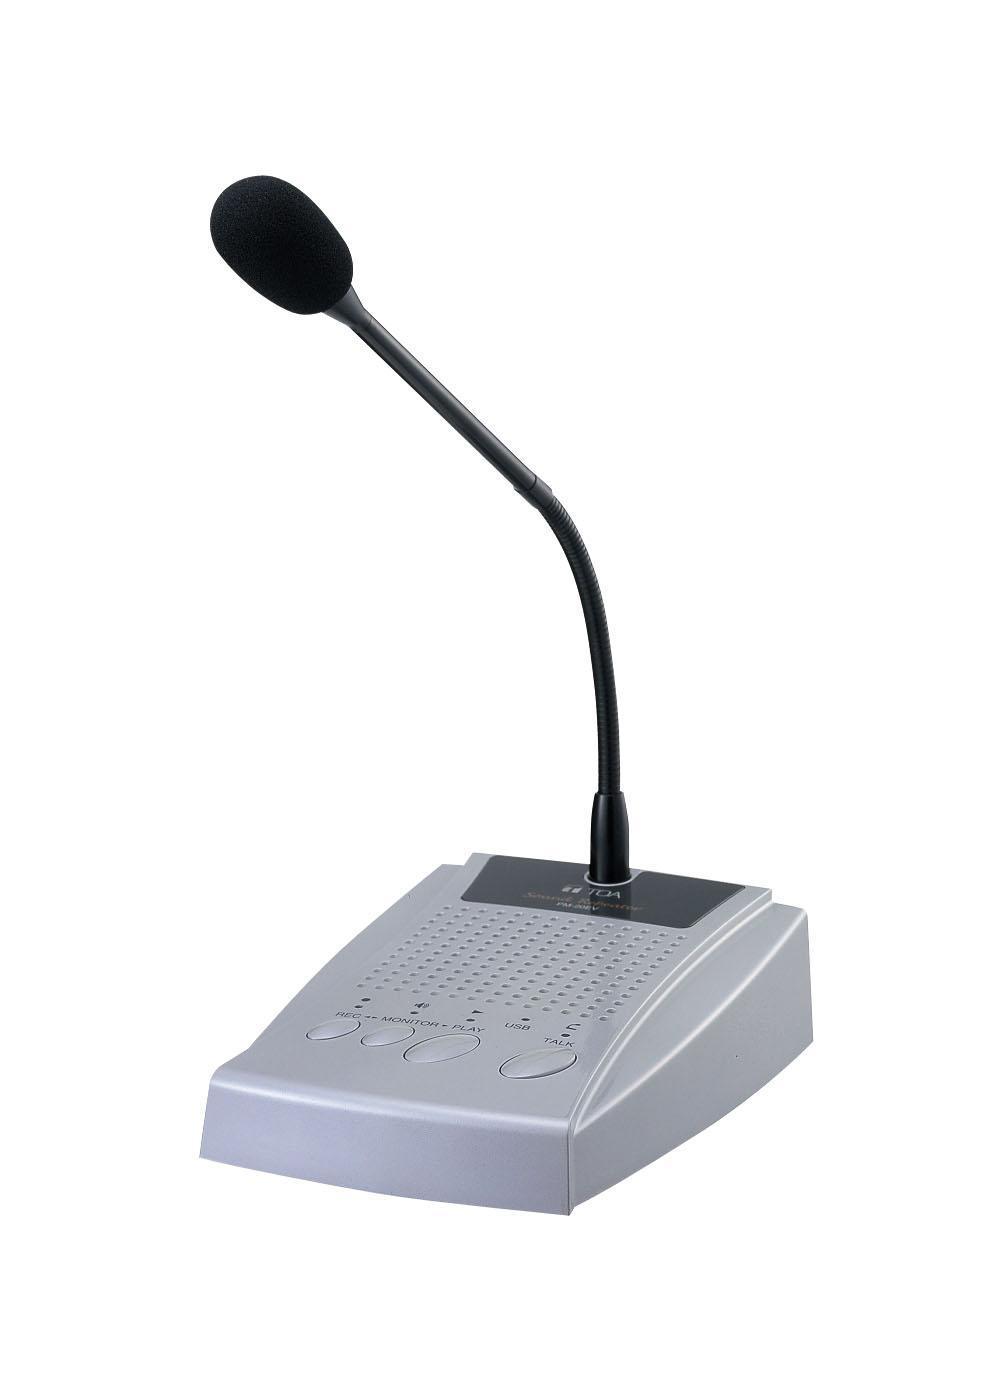 Foto TOA PM-20EV Desk Microphone Notices With Message foto 800112